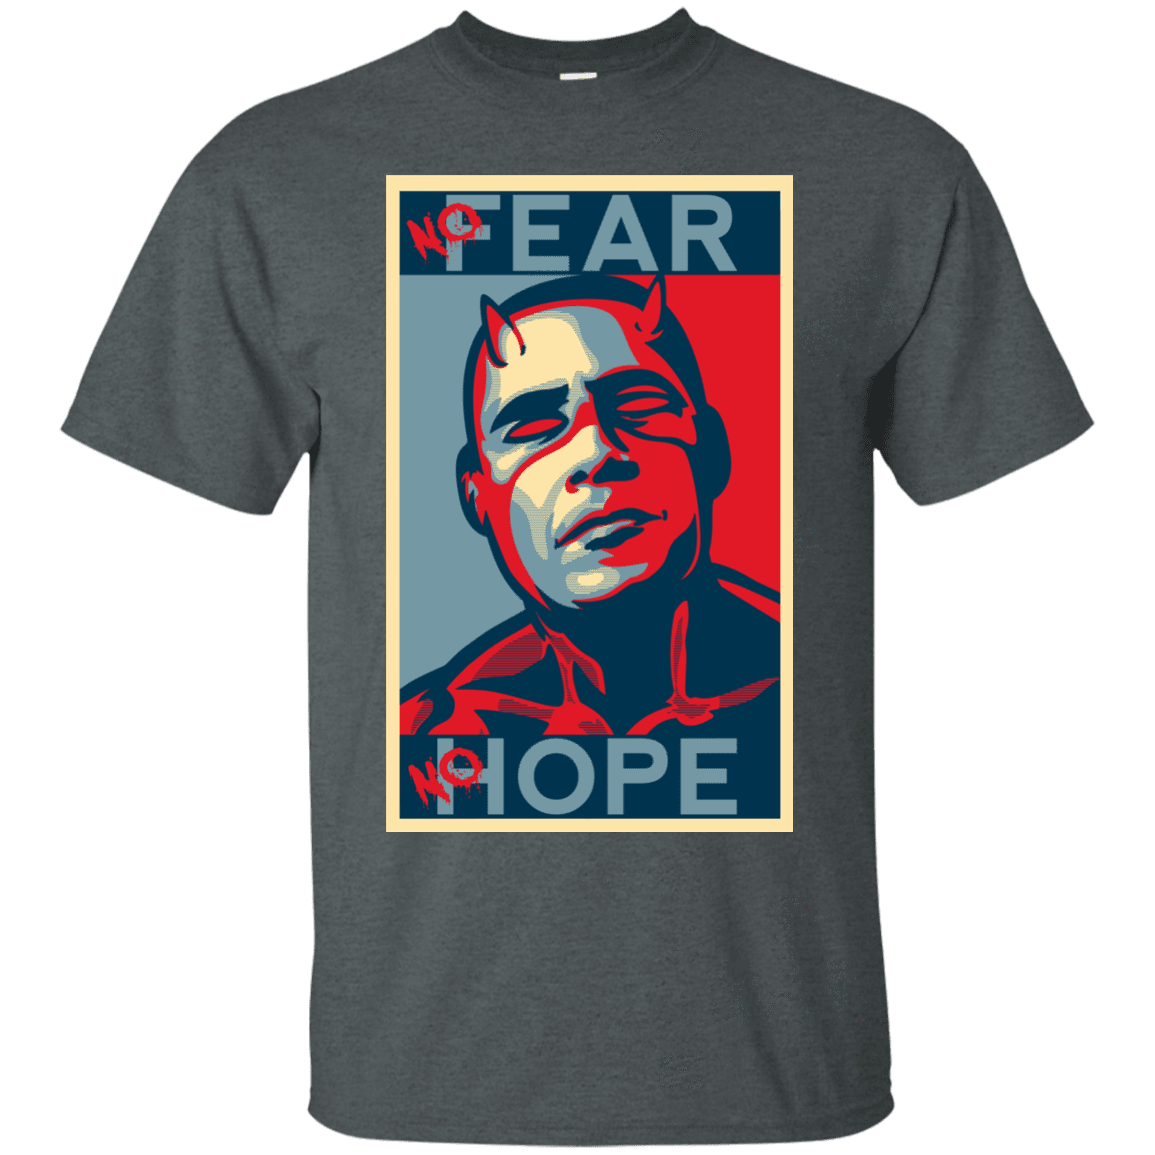 T-Shirts Dark Heather / S A man With No Fear T-Shirt